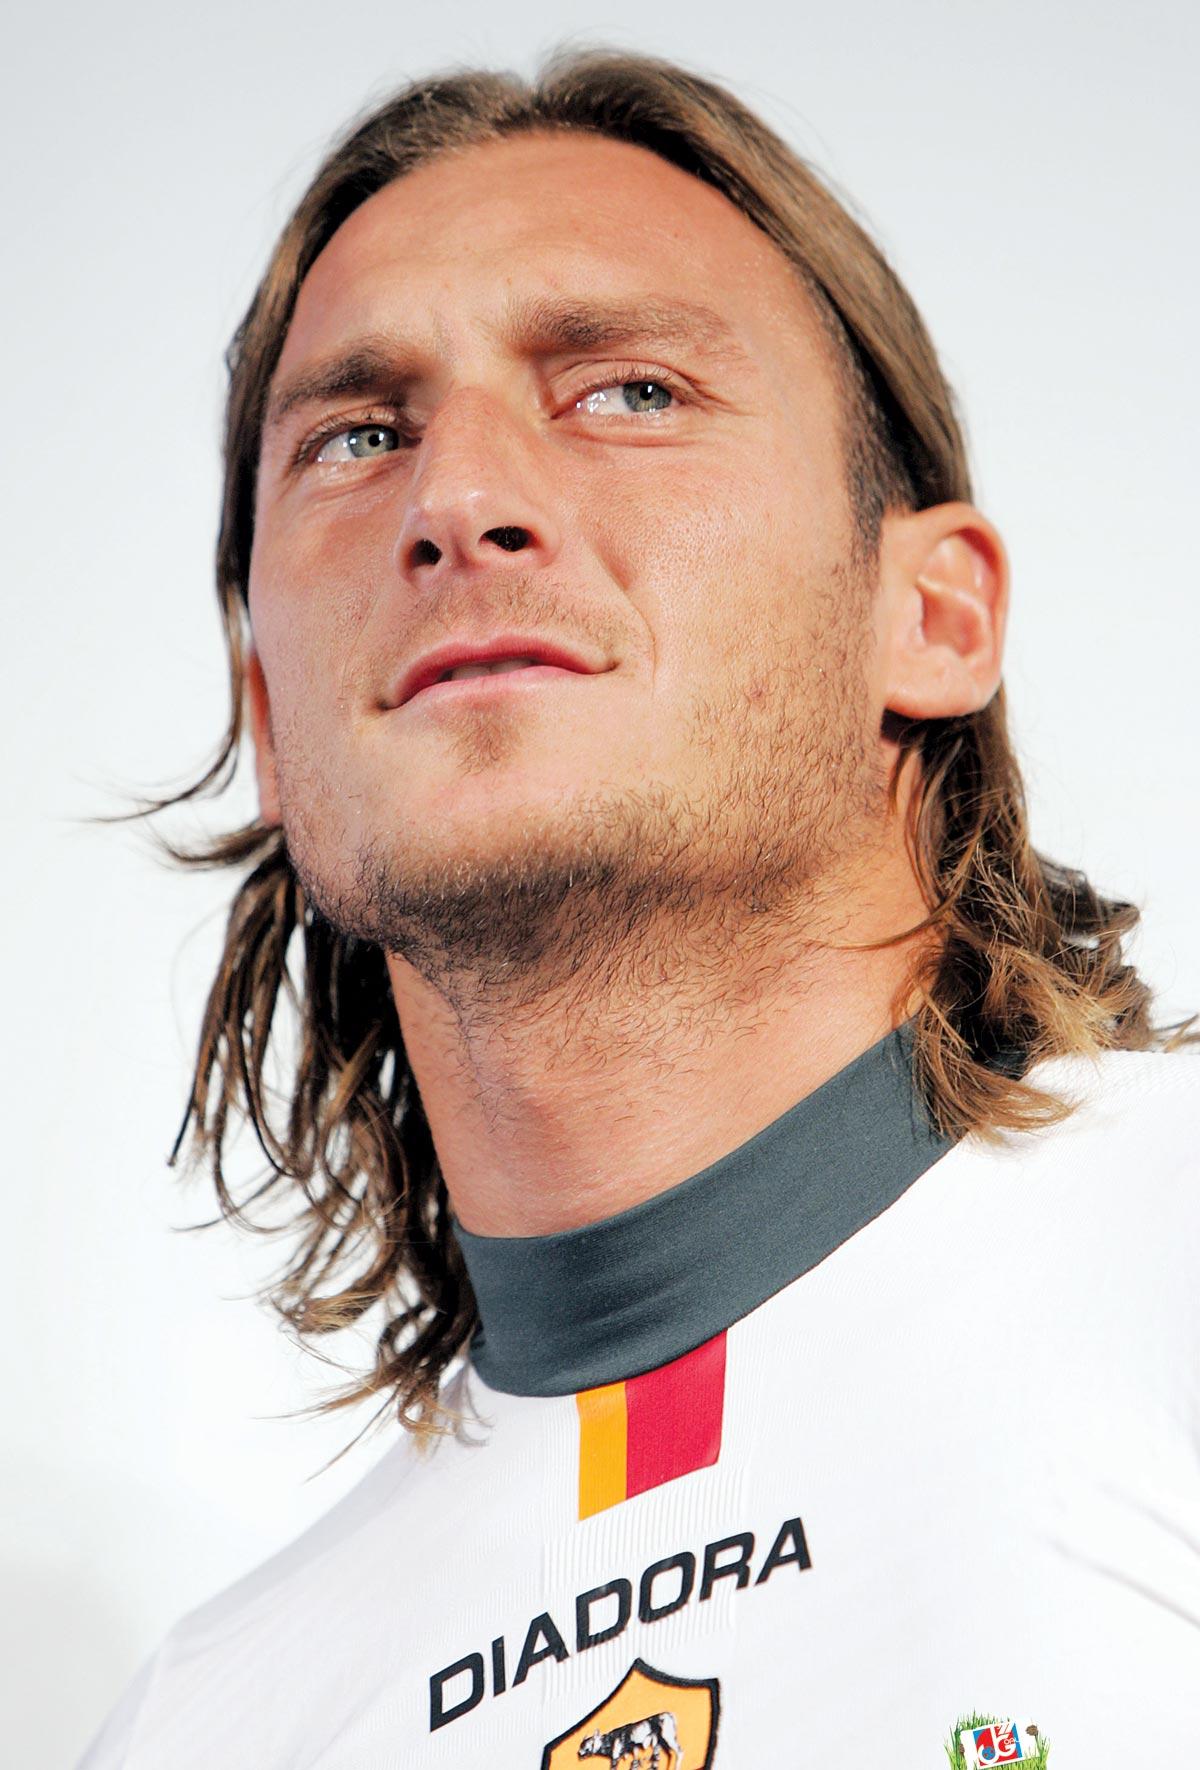 totti wallpaper,forehead,player,football player,soccer player,ear (#125240)  - WallpaperUse